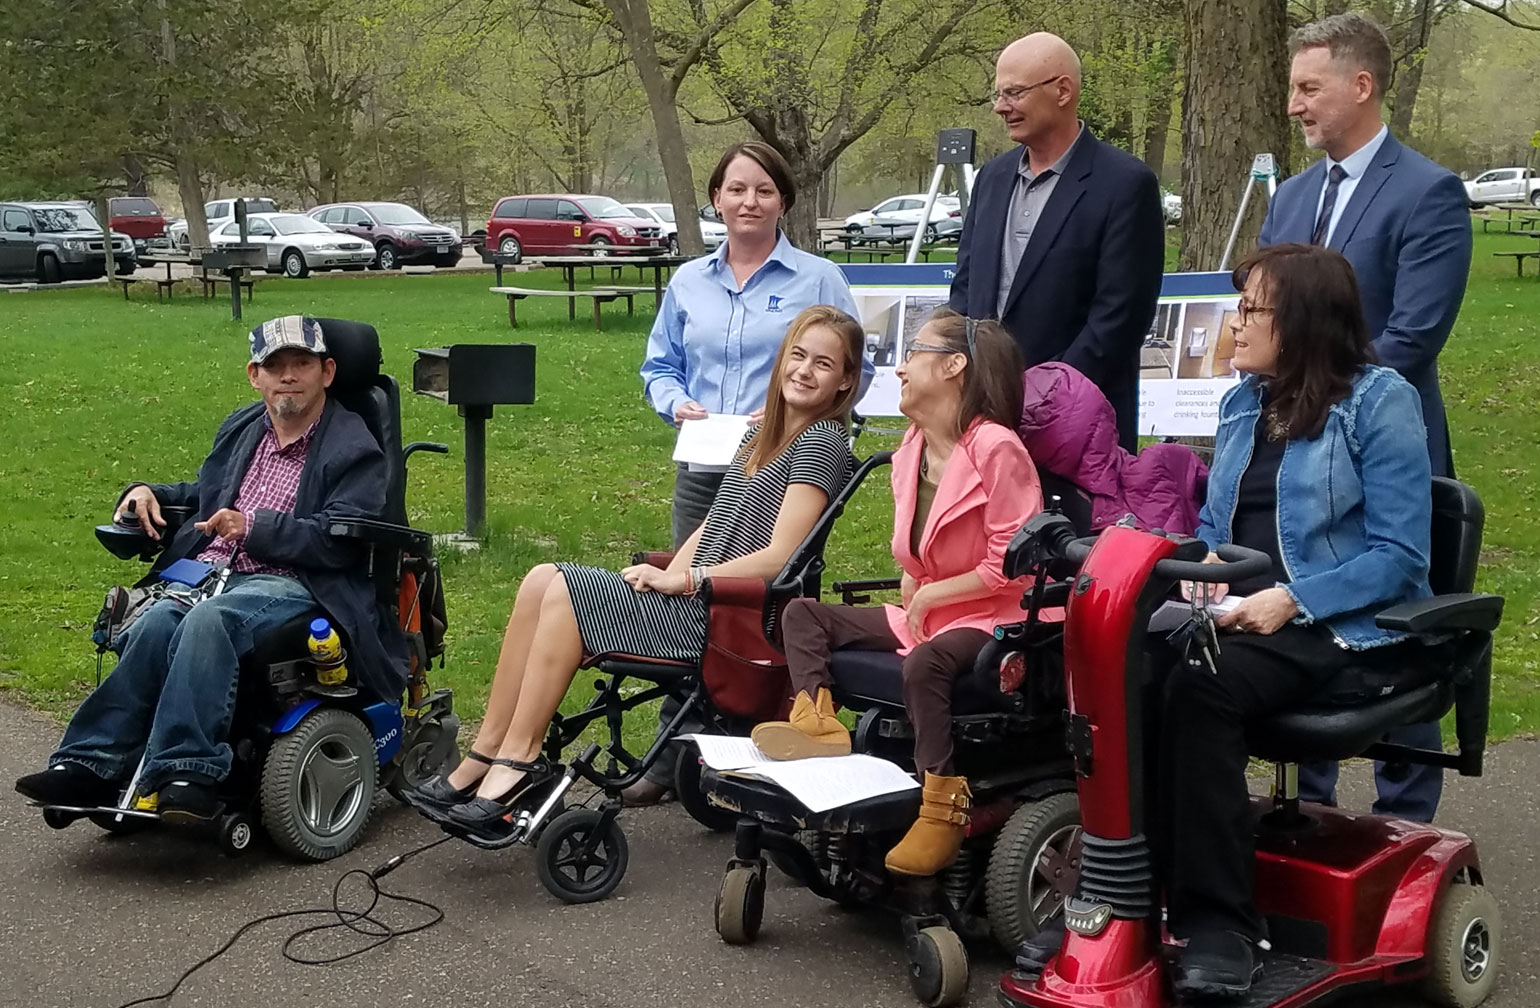 Katie Allee joined the Minnesota DNR and others to advocate for fully accessible state parks.